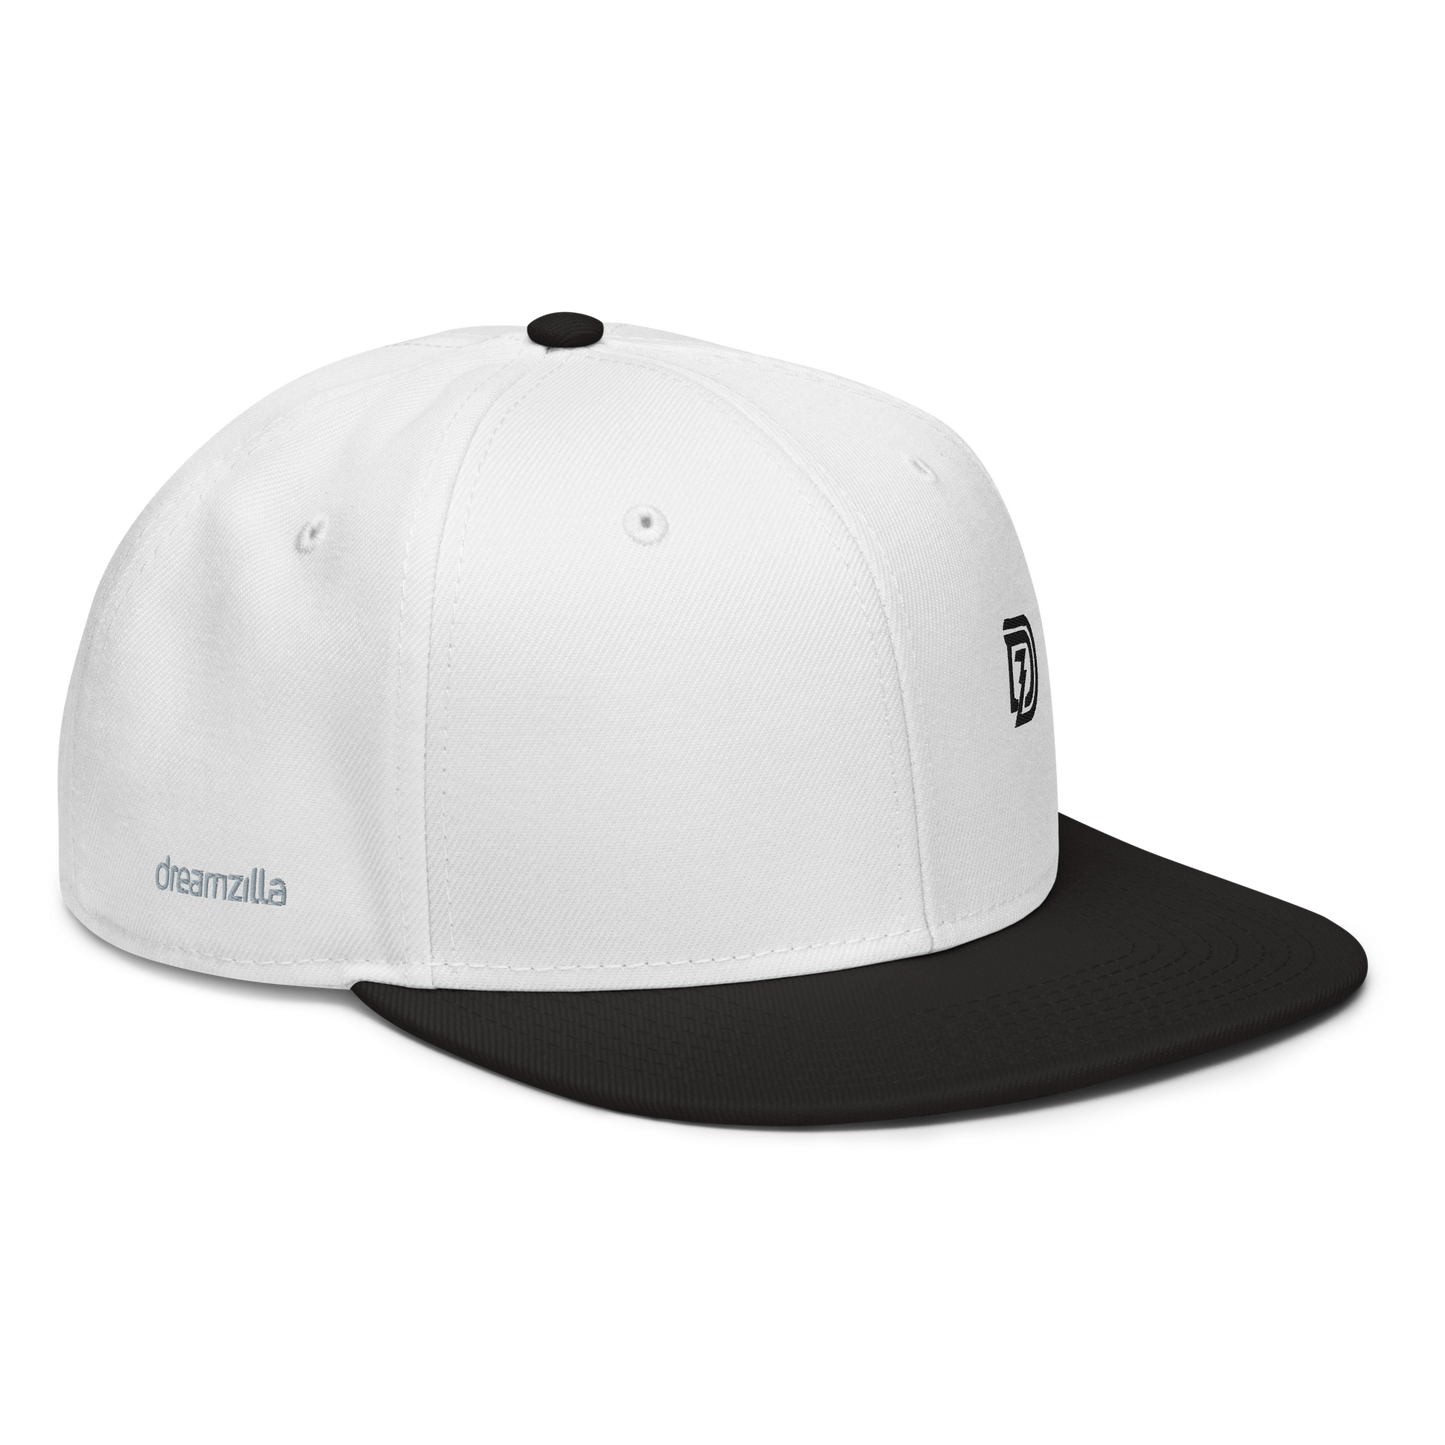 Angled View of DZ Monochrome Snapback in White with Black Brim